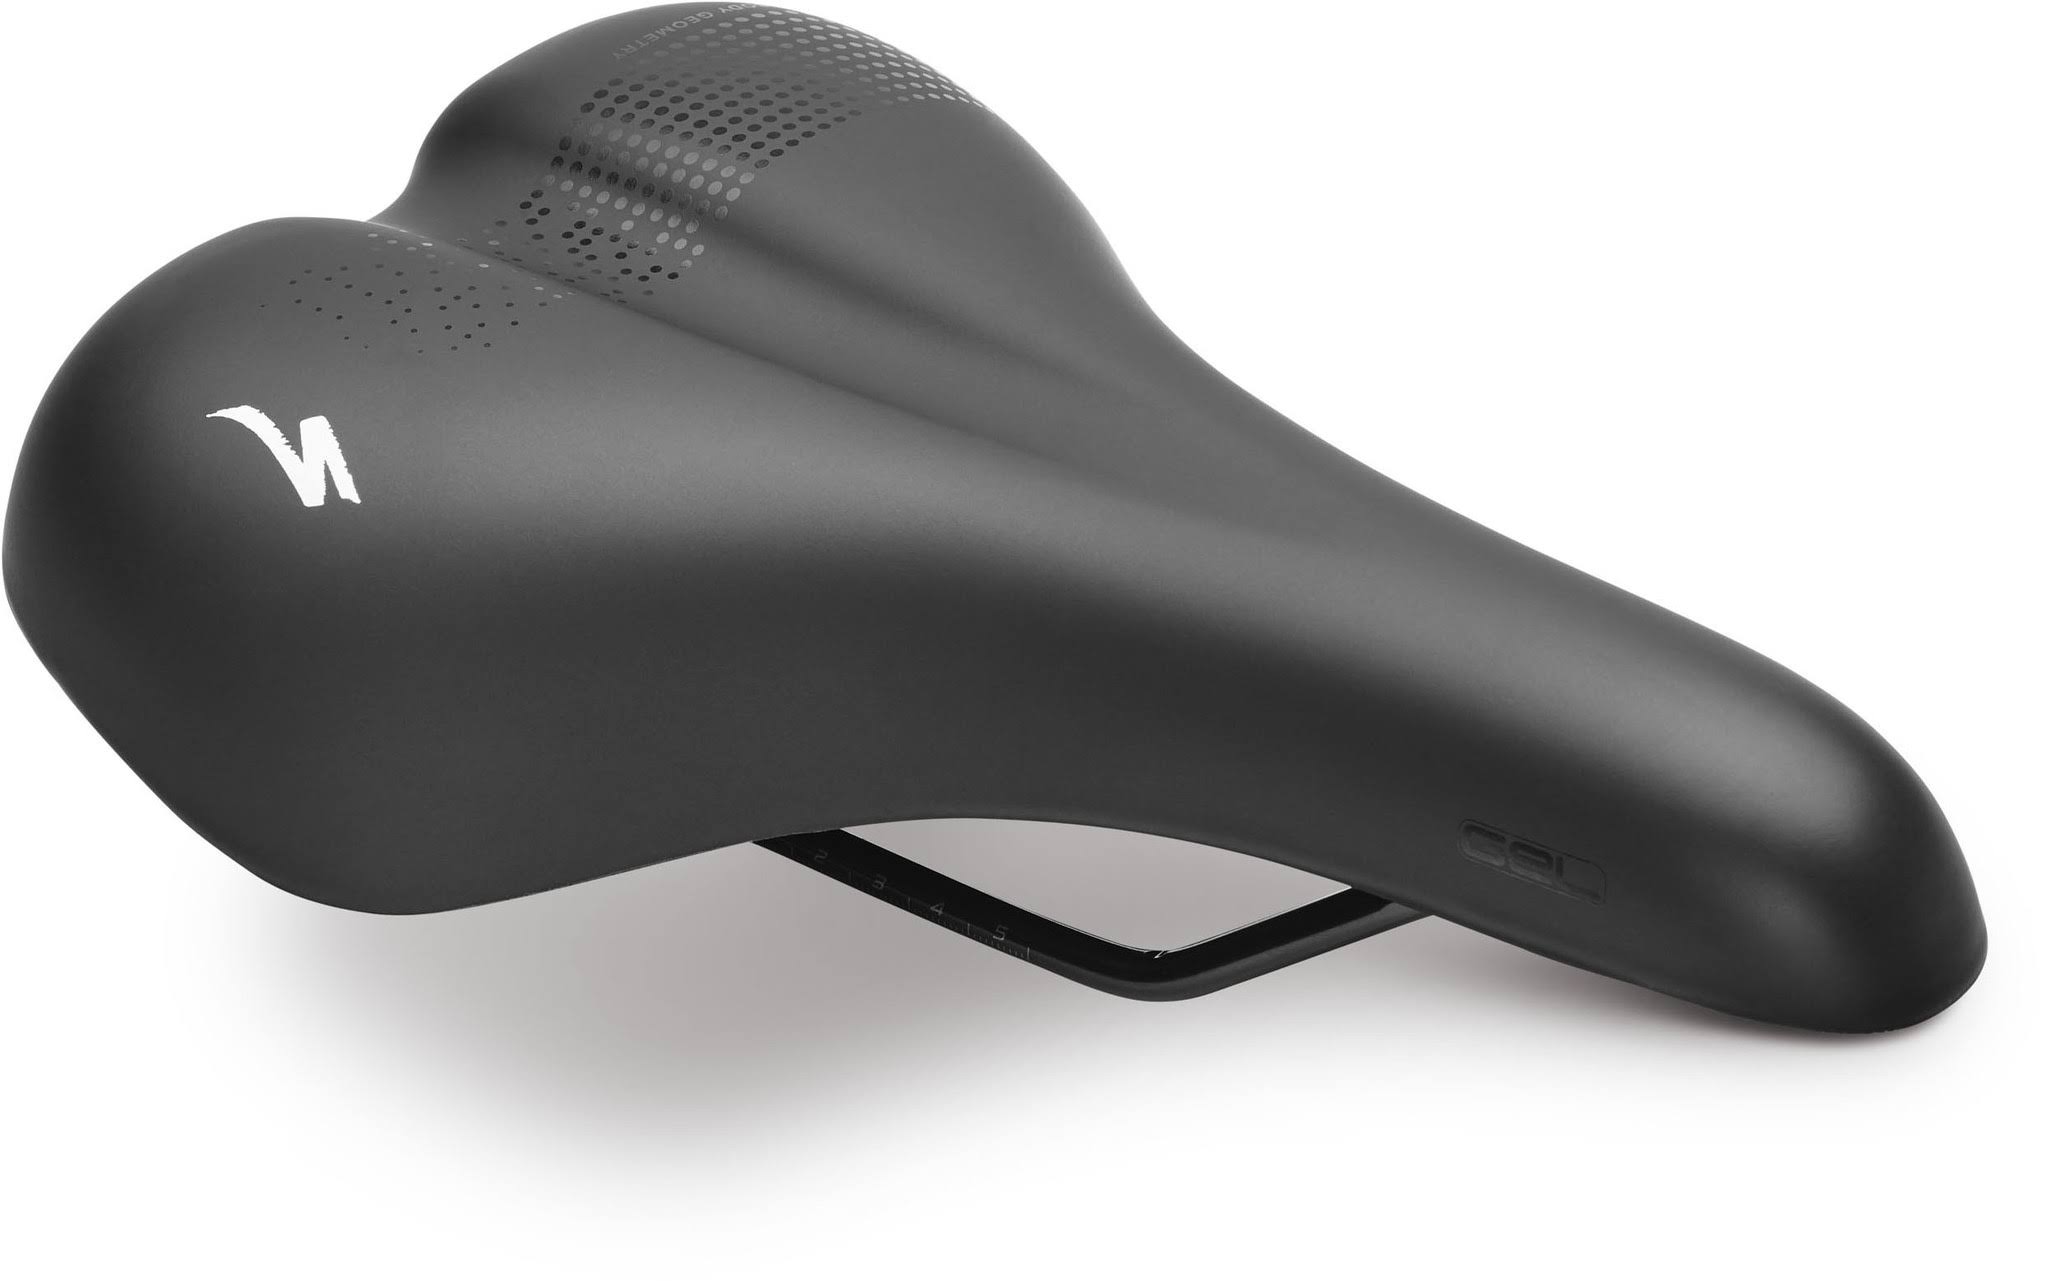 Specialized Body Geometry Comfort Gel Bicycle Saddle in Black, Size 180mm